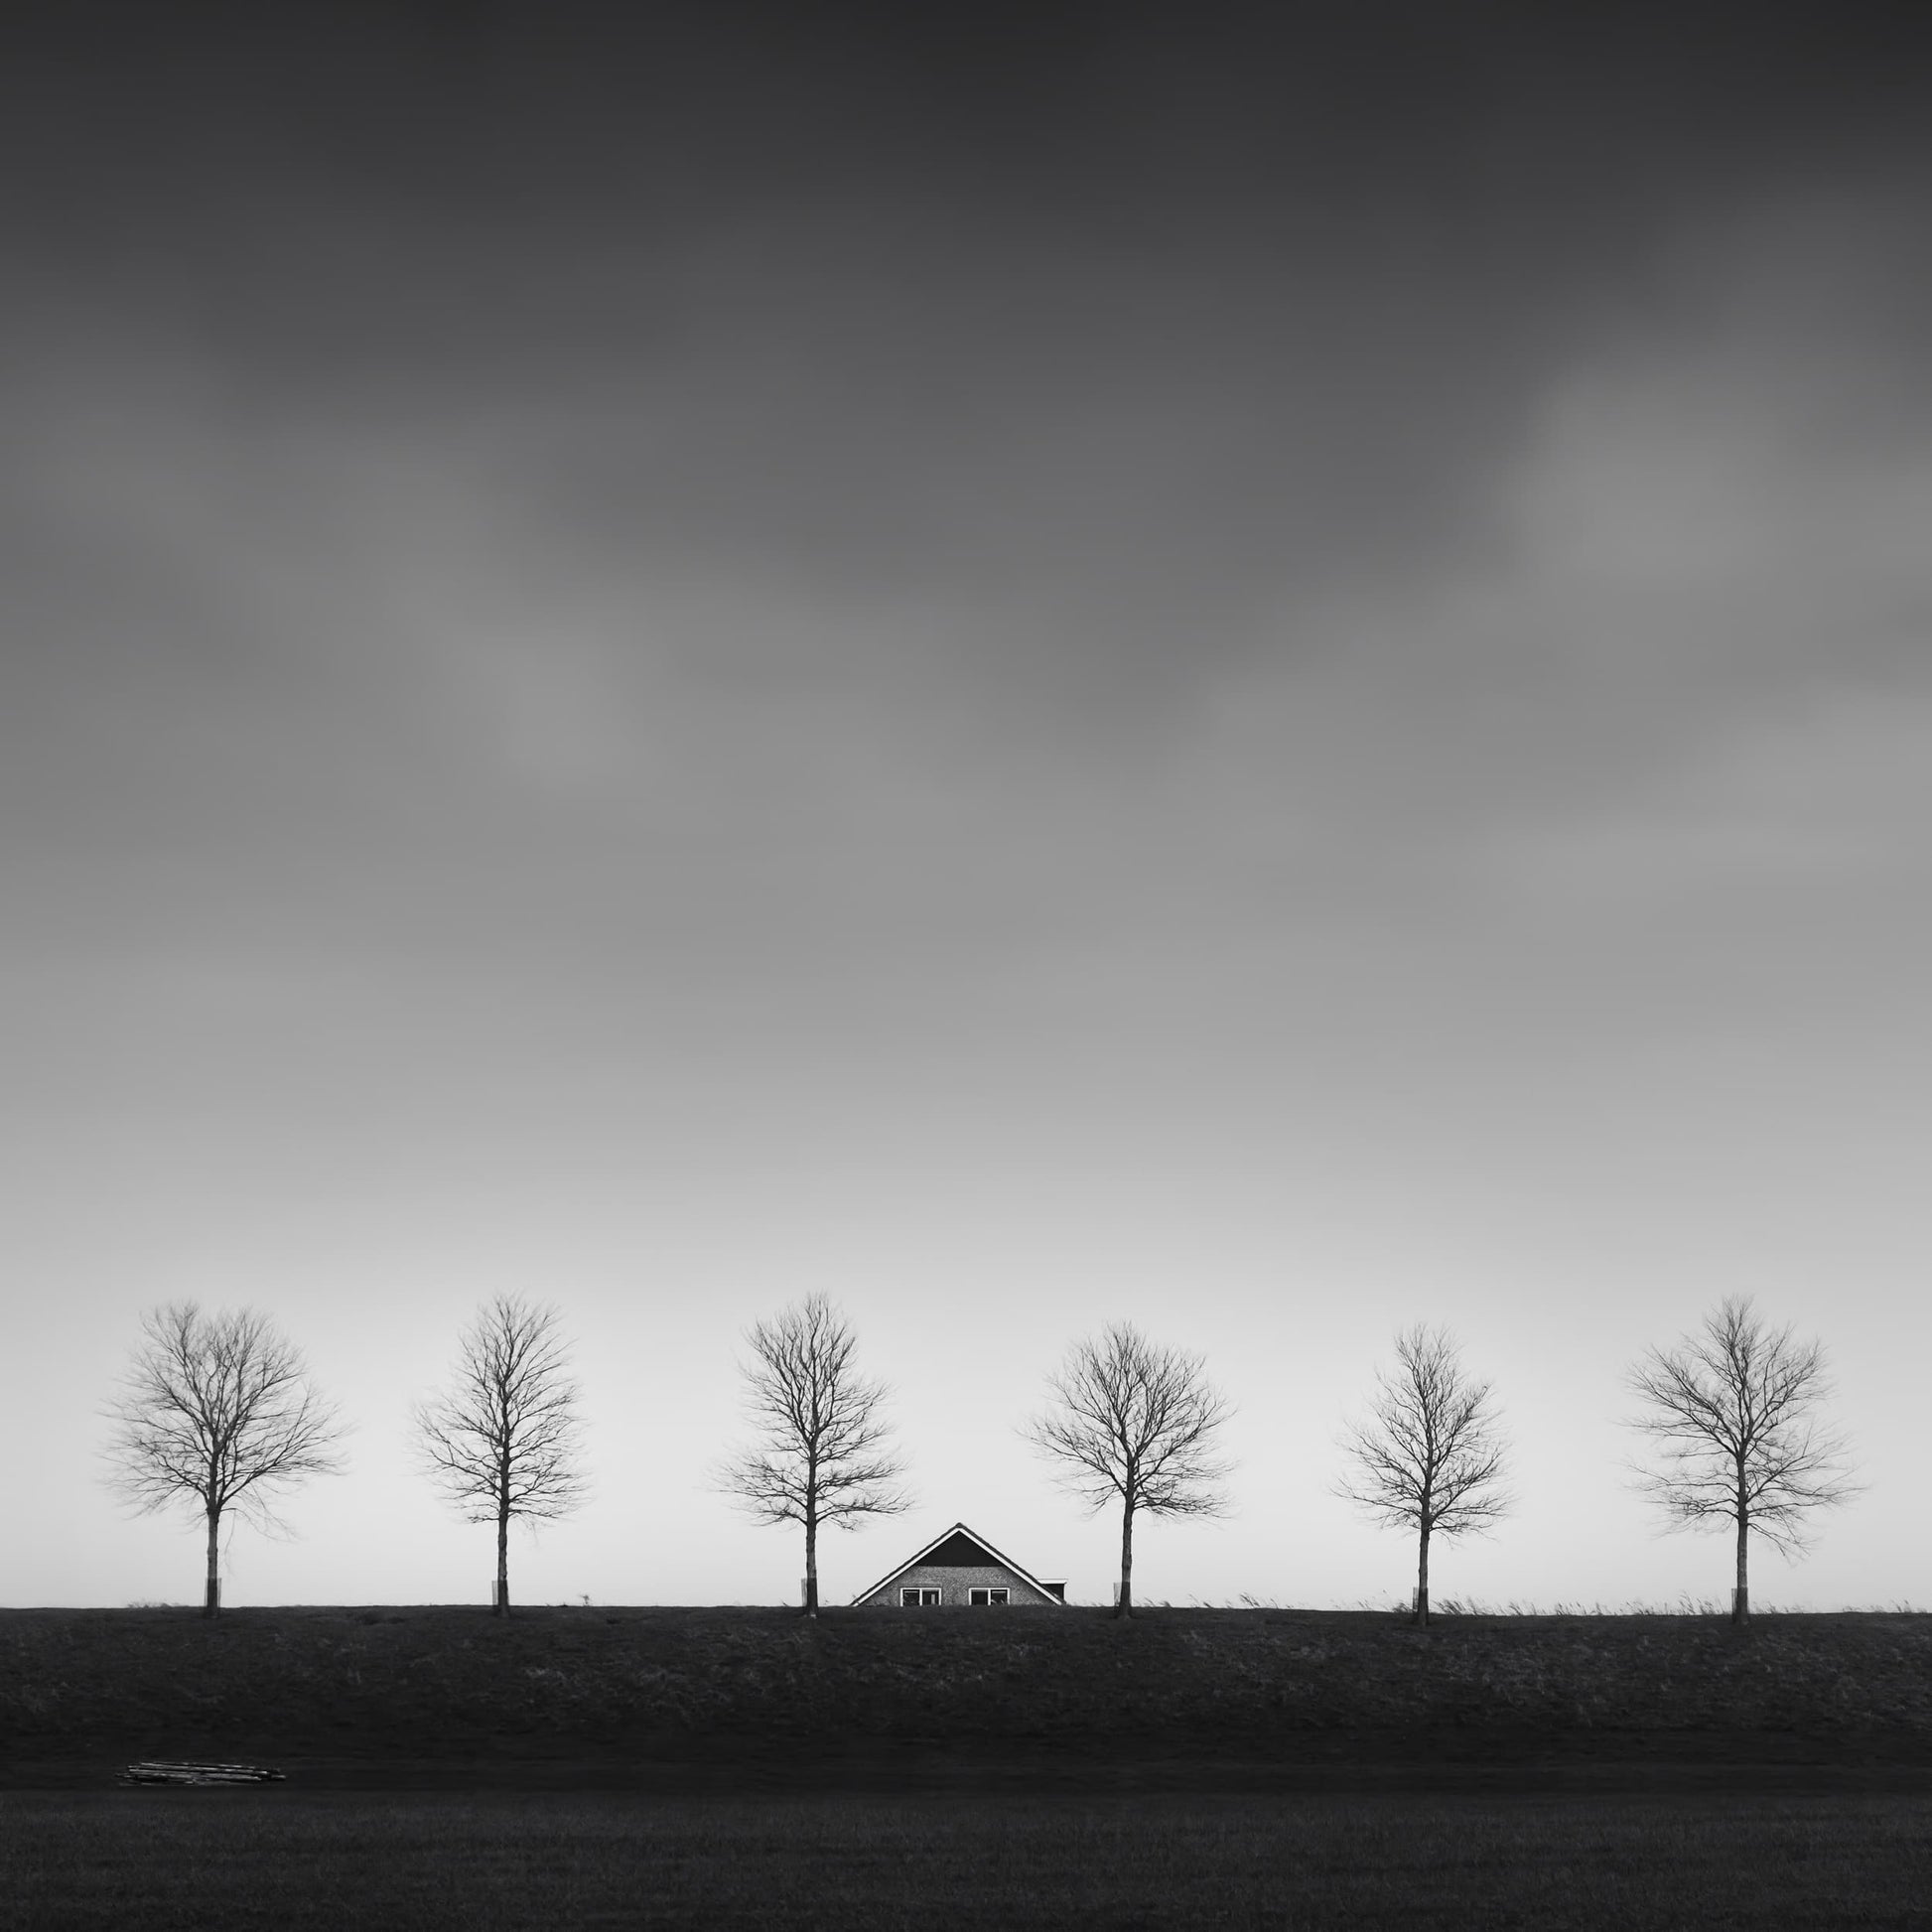 The artpiece 'Behind the Dike' by Marco Maljaars shows a dyke in The Netherlands, covered in trees with the top of a house just visible above the top of the dike.